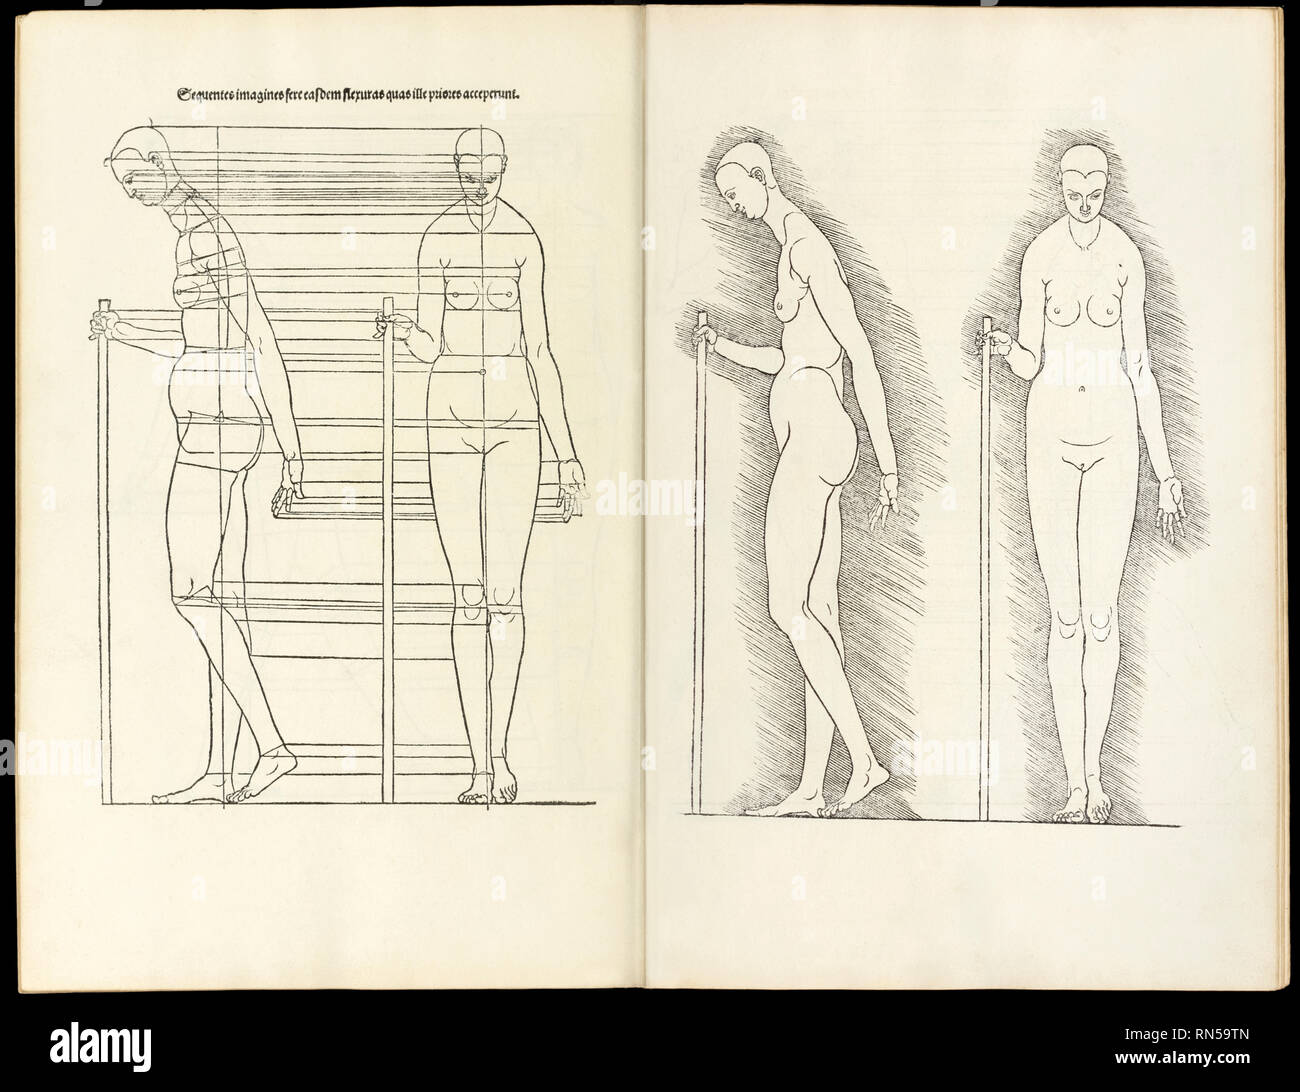 Female with staff, anatomical woodcut from ‘Hierinn sind begriffen vier bücher von menschlicher Proportion’ by Albrecht Durer (1471-1528) a work about the proportion of the human body first published in 1528. Stock Photo